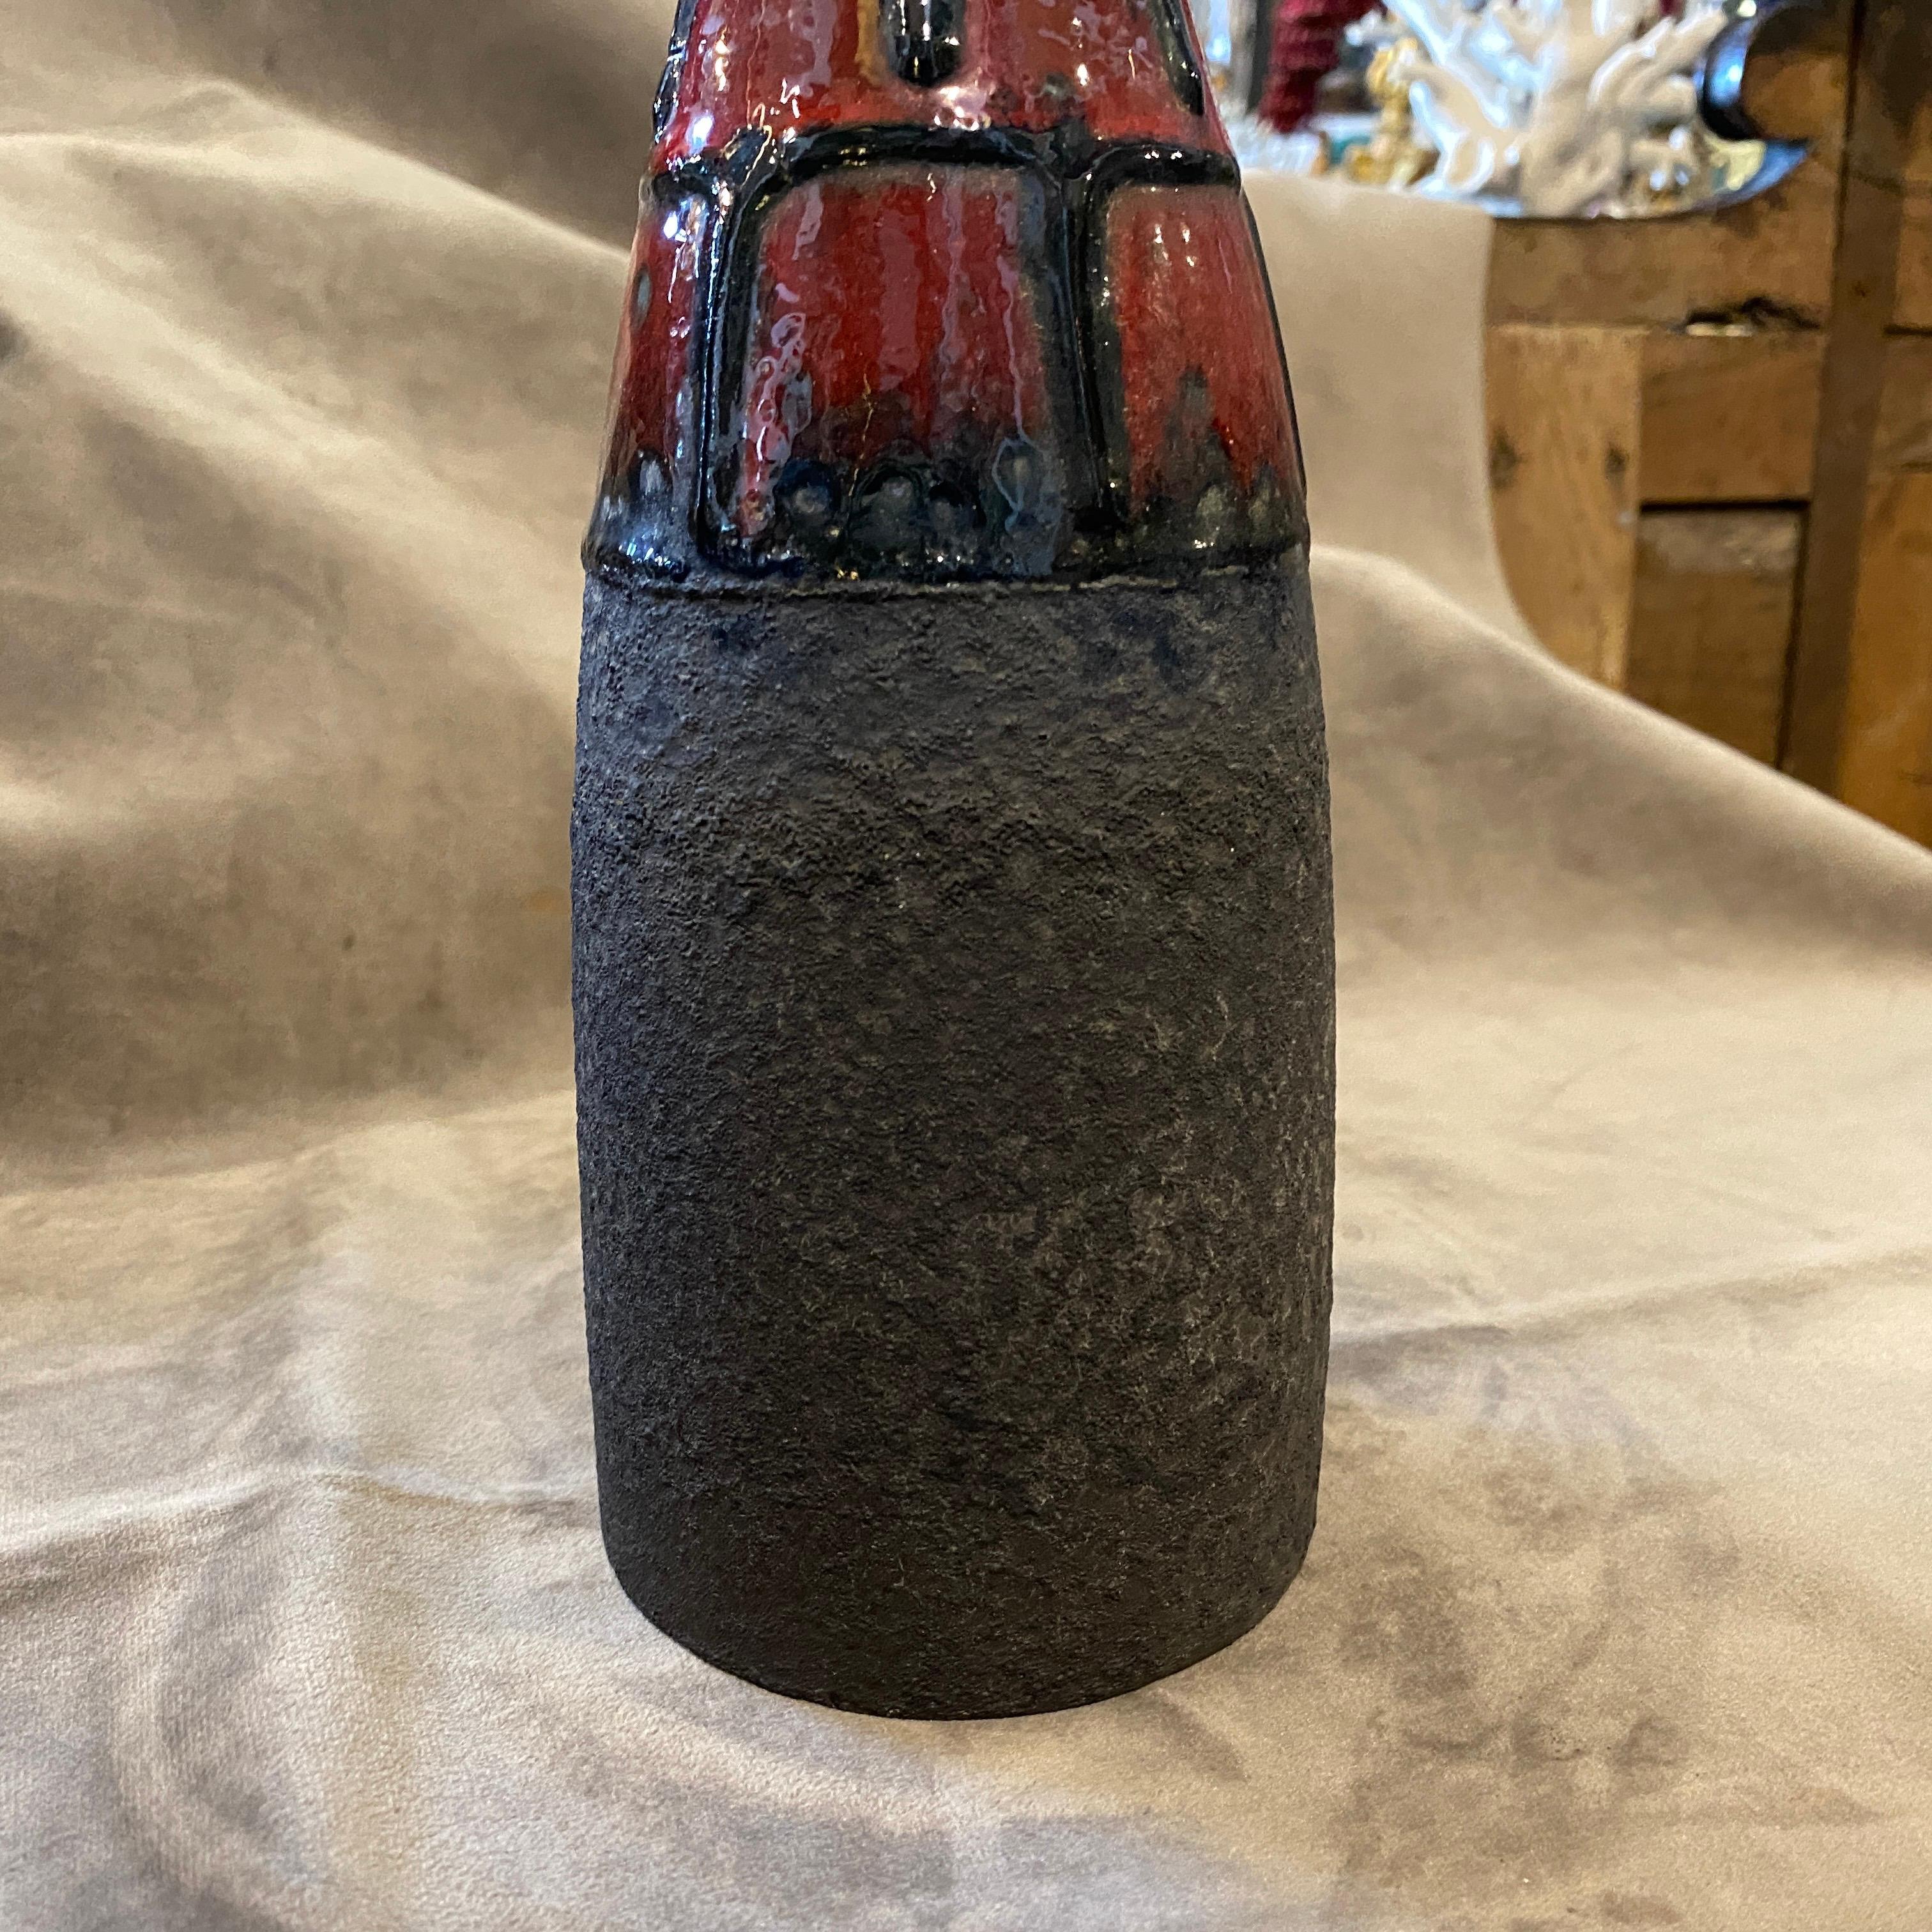 German 1970s Mid-Century Modern Red and Black Fat Lava Ceramic Vase by Roth For Sale